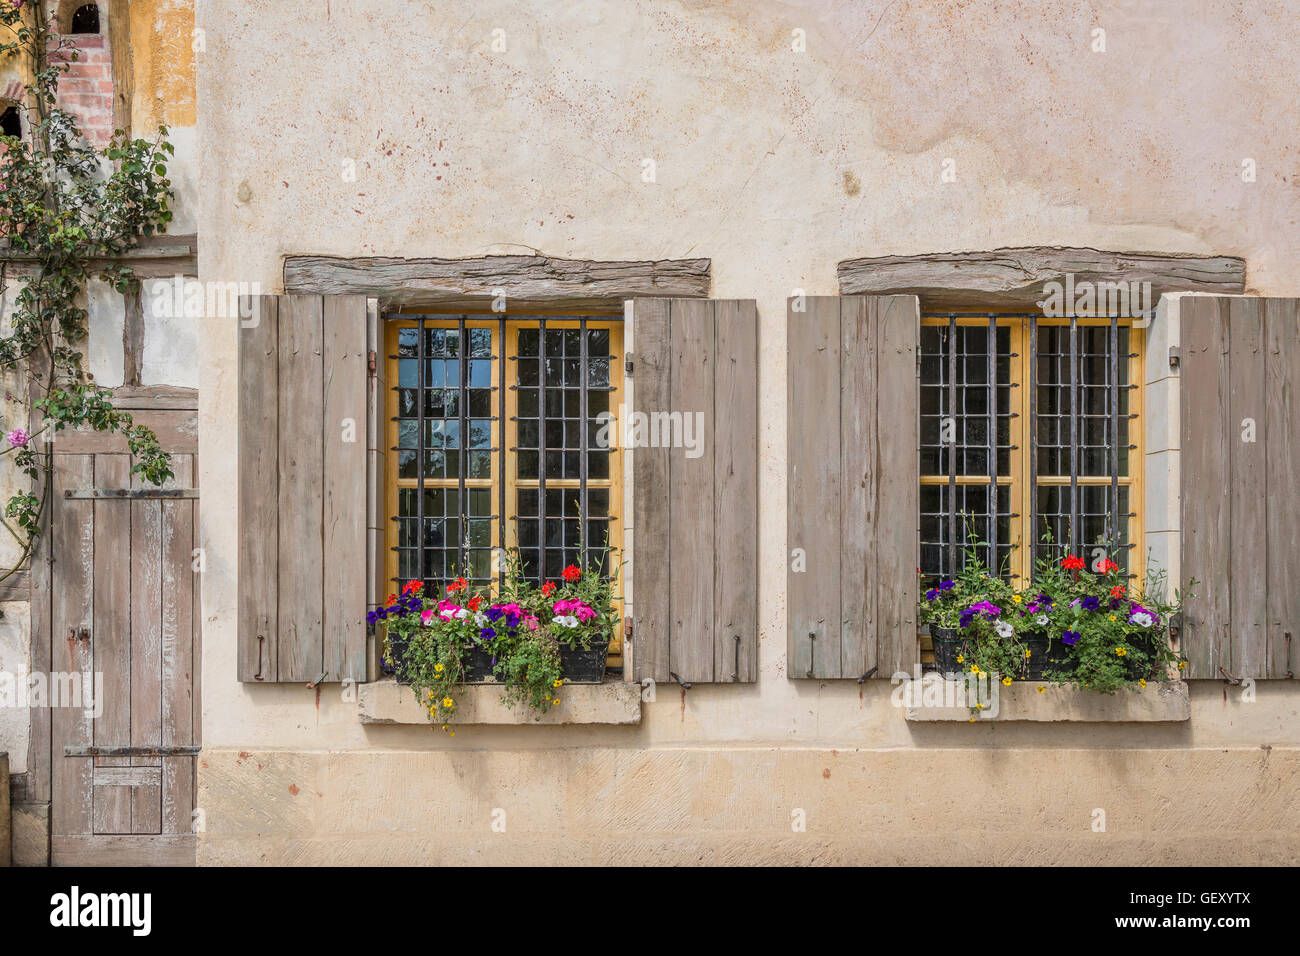 Windows of a medieval house in Marie Antoinette's estate at Versailles. Stock Photo